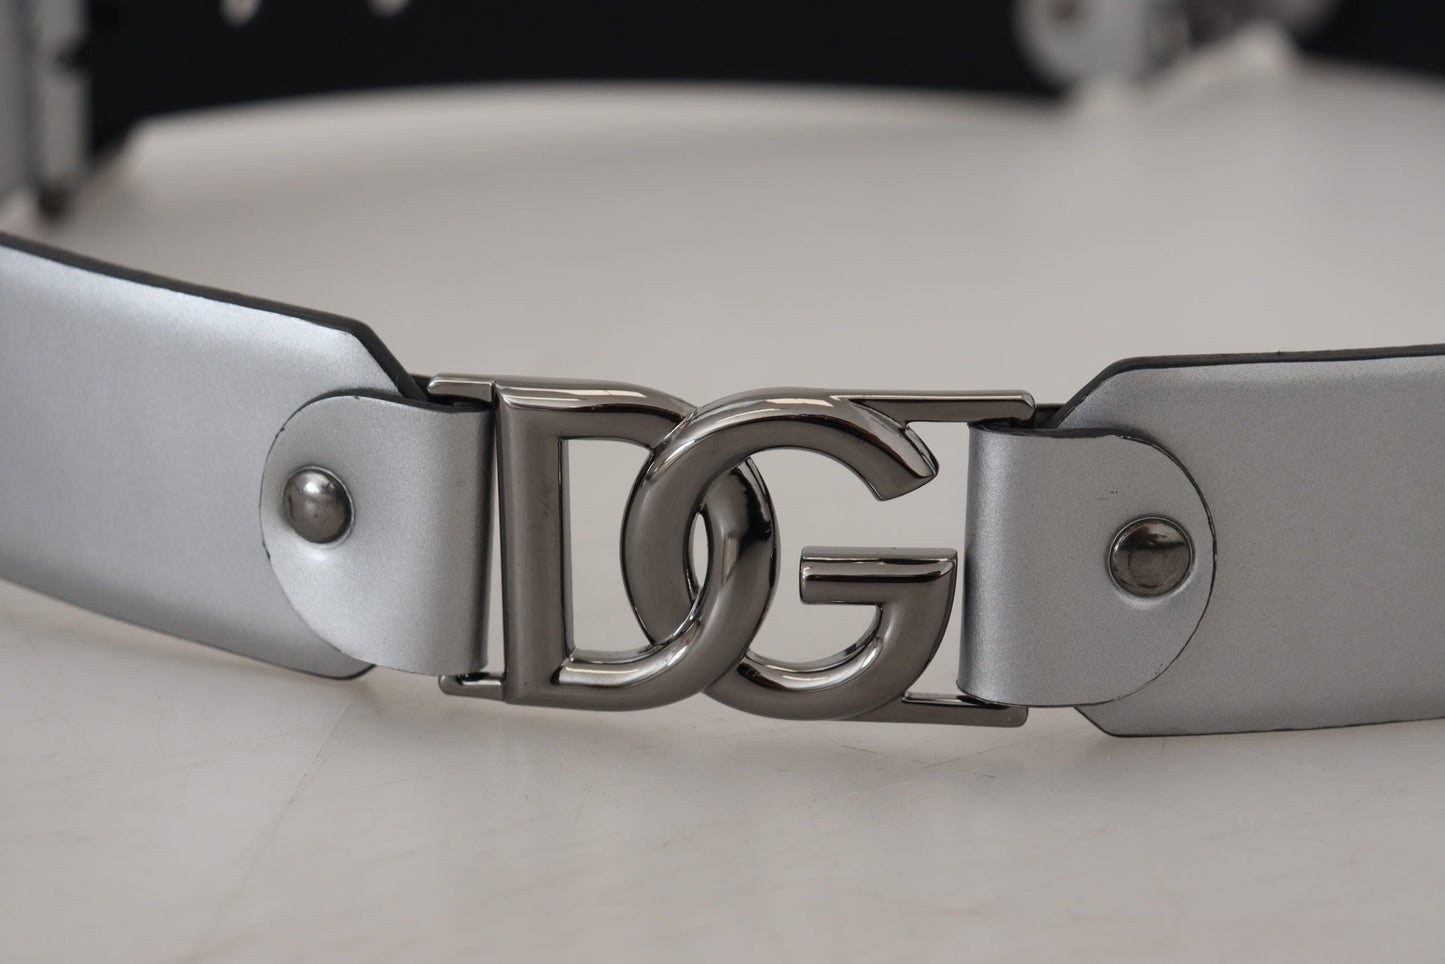 Dolce & Gabbana Chic Silver Leather Belt with Metal Buckle | Fashionsarah.com